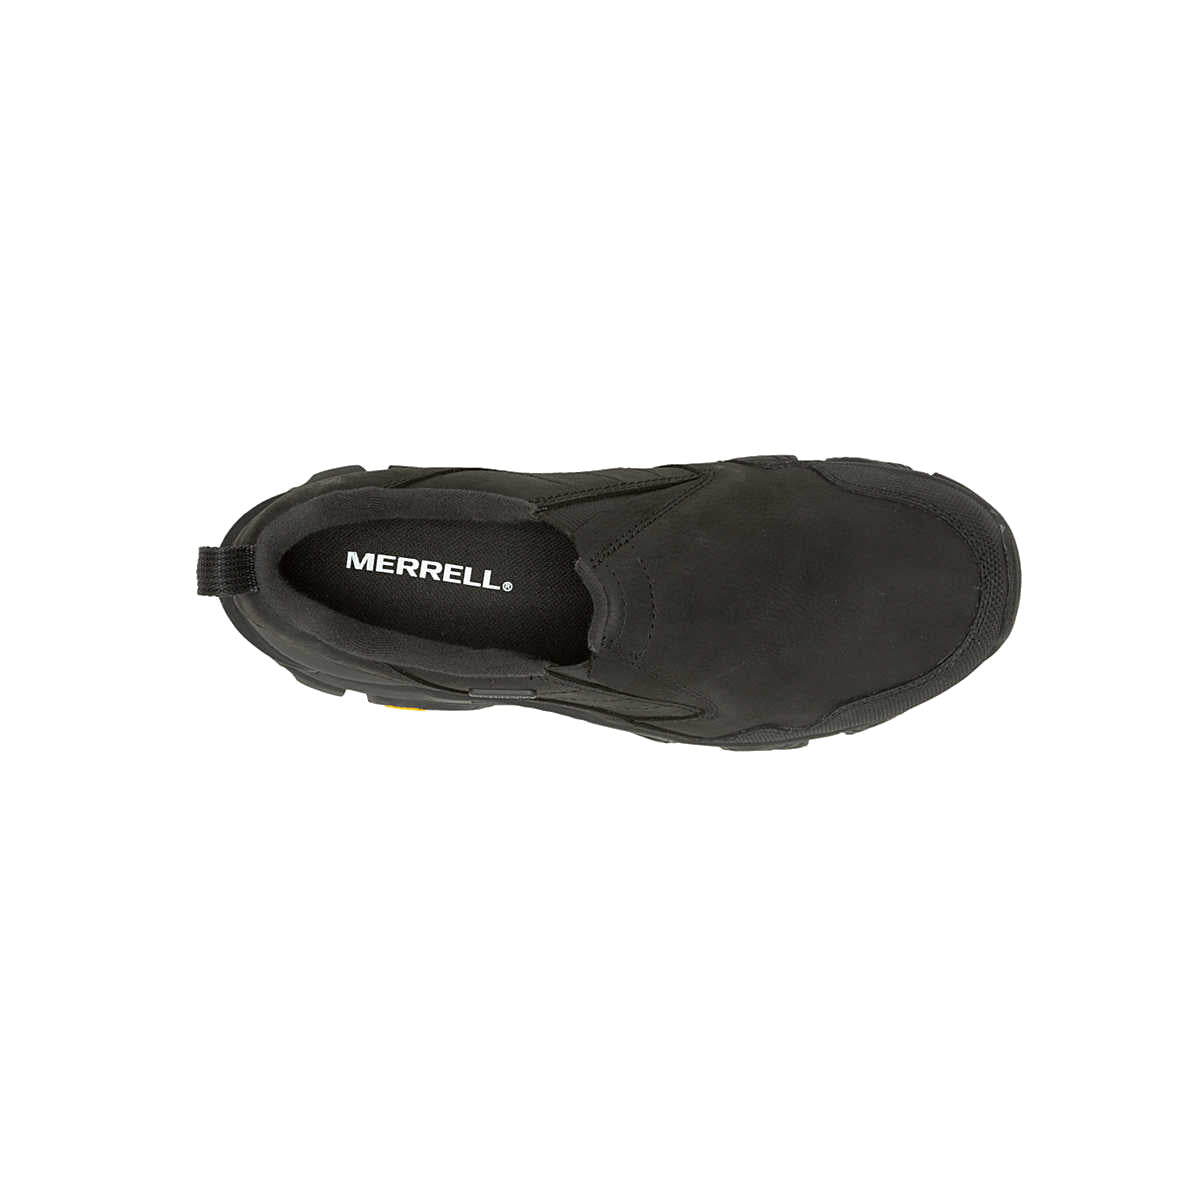 Merrell Women's ColdPack 3 Thermo Moc Waterproof - Black